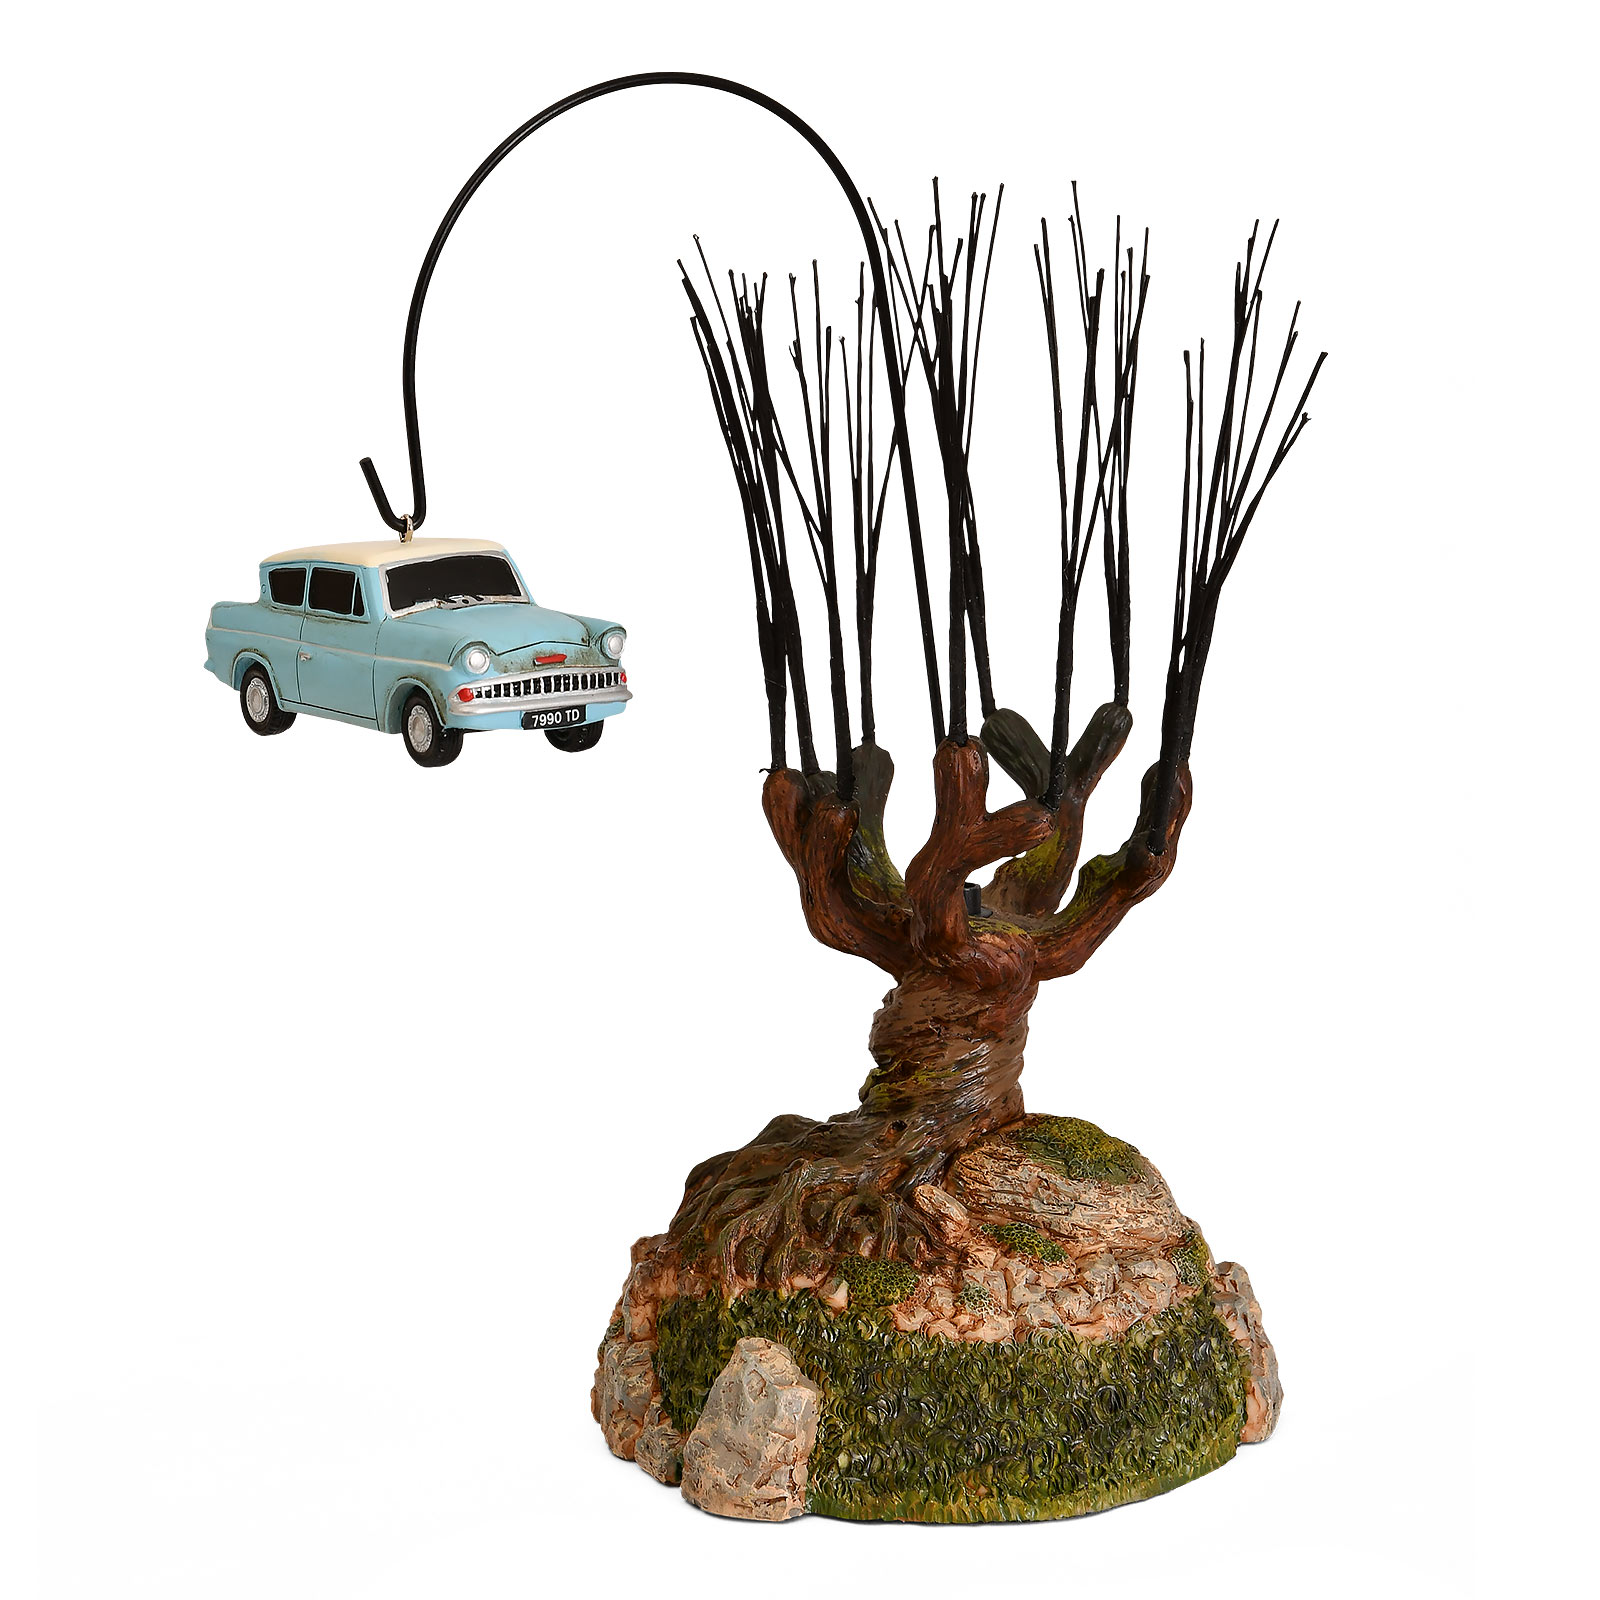 Whipping willow with flying car miniature replica - Harry Potter